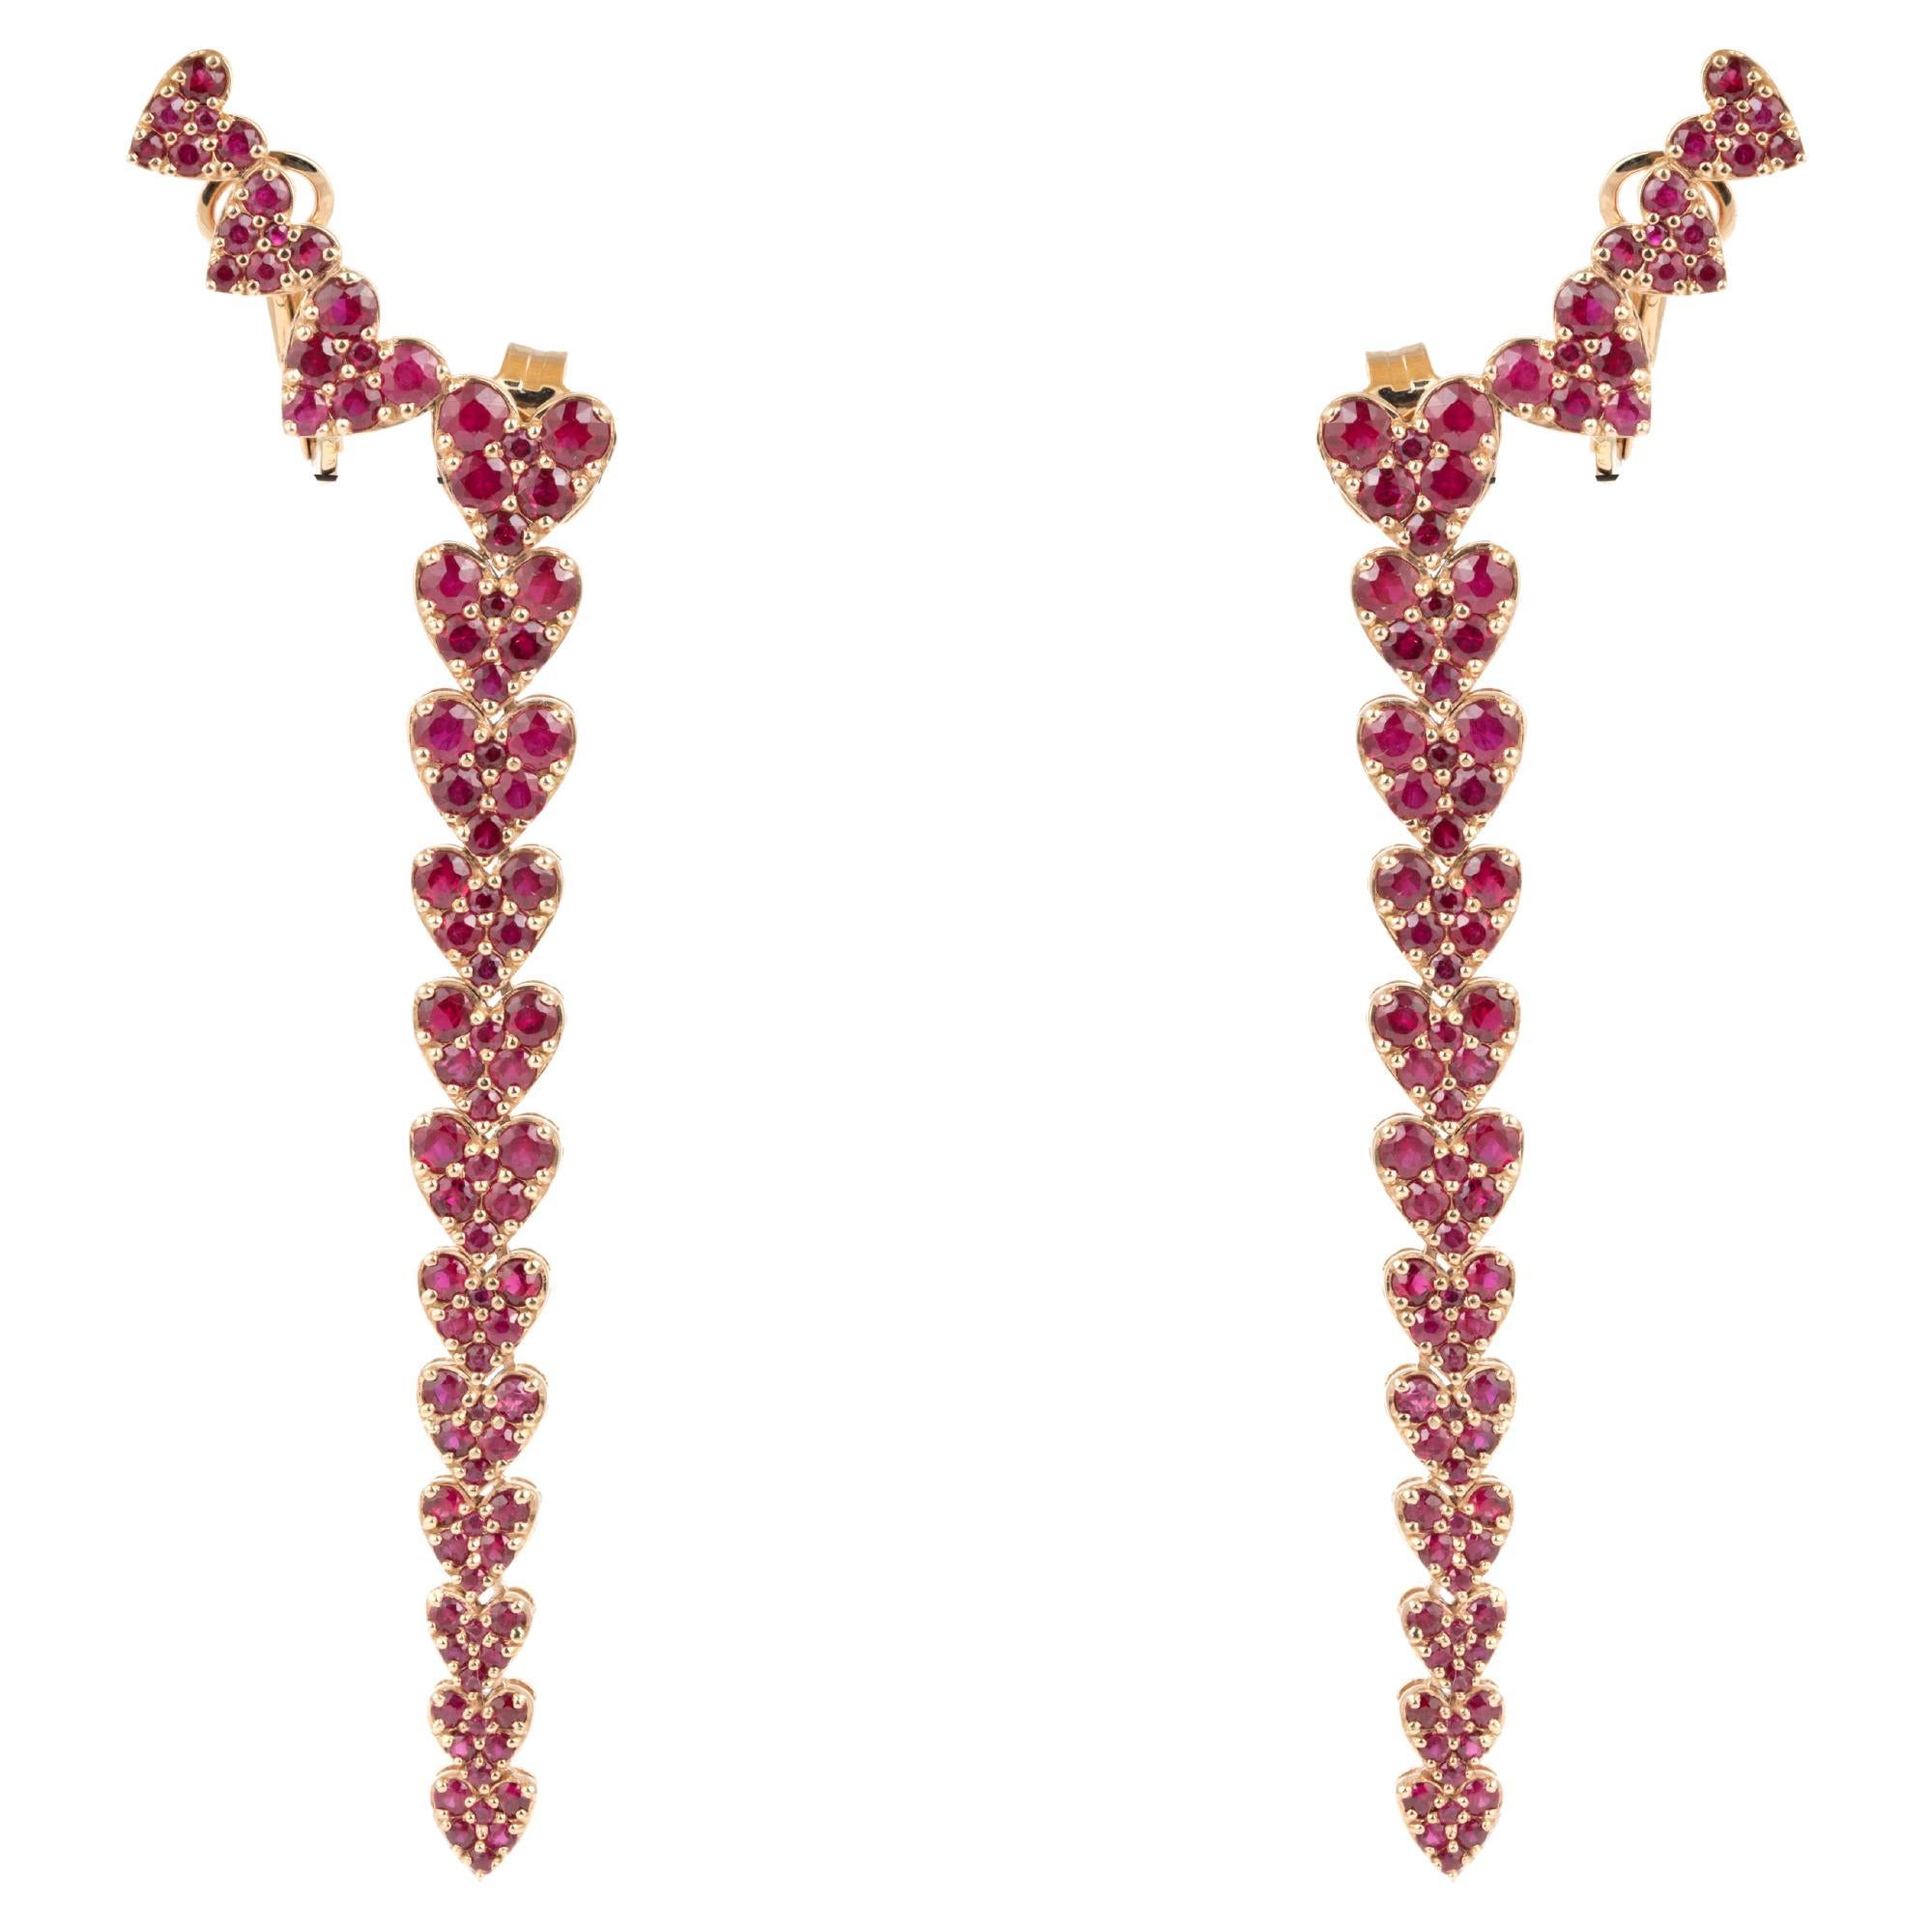 Natural Ruby 6.02cts in 18k Gold 13.05gms Earring